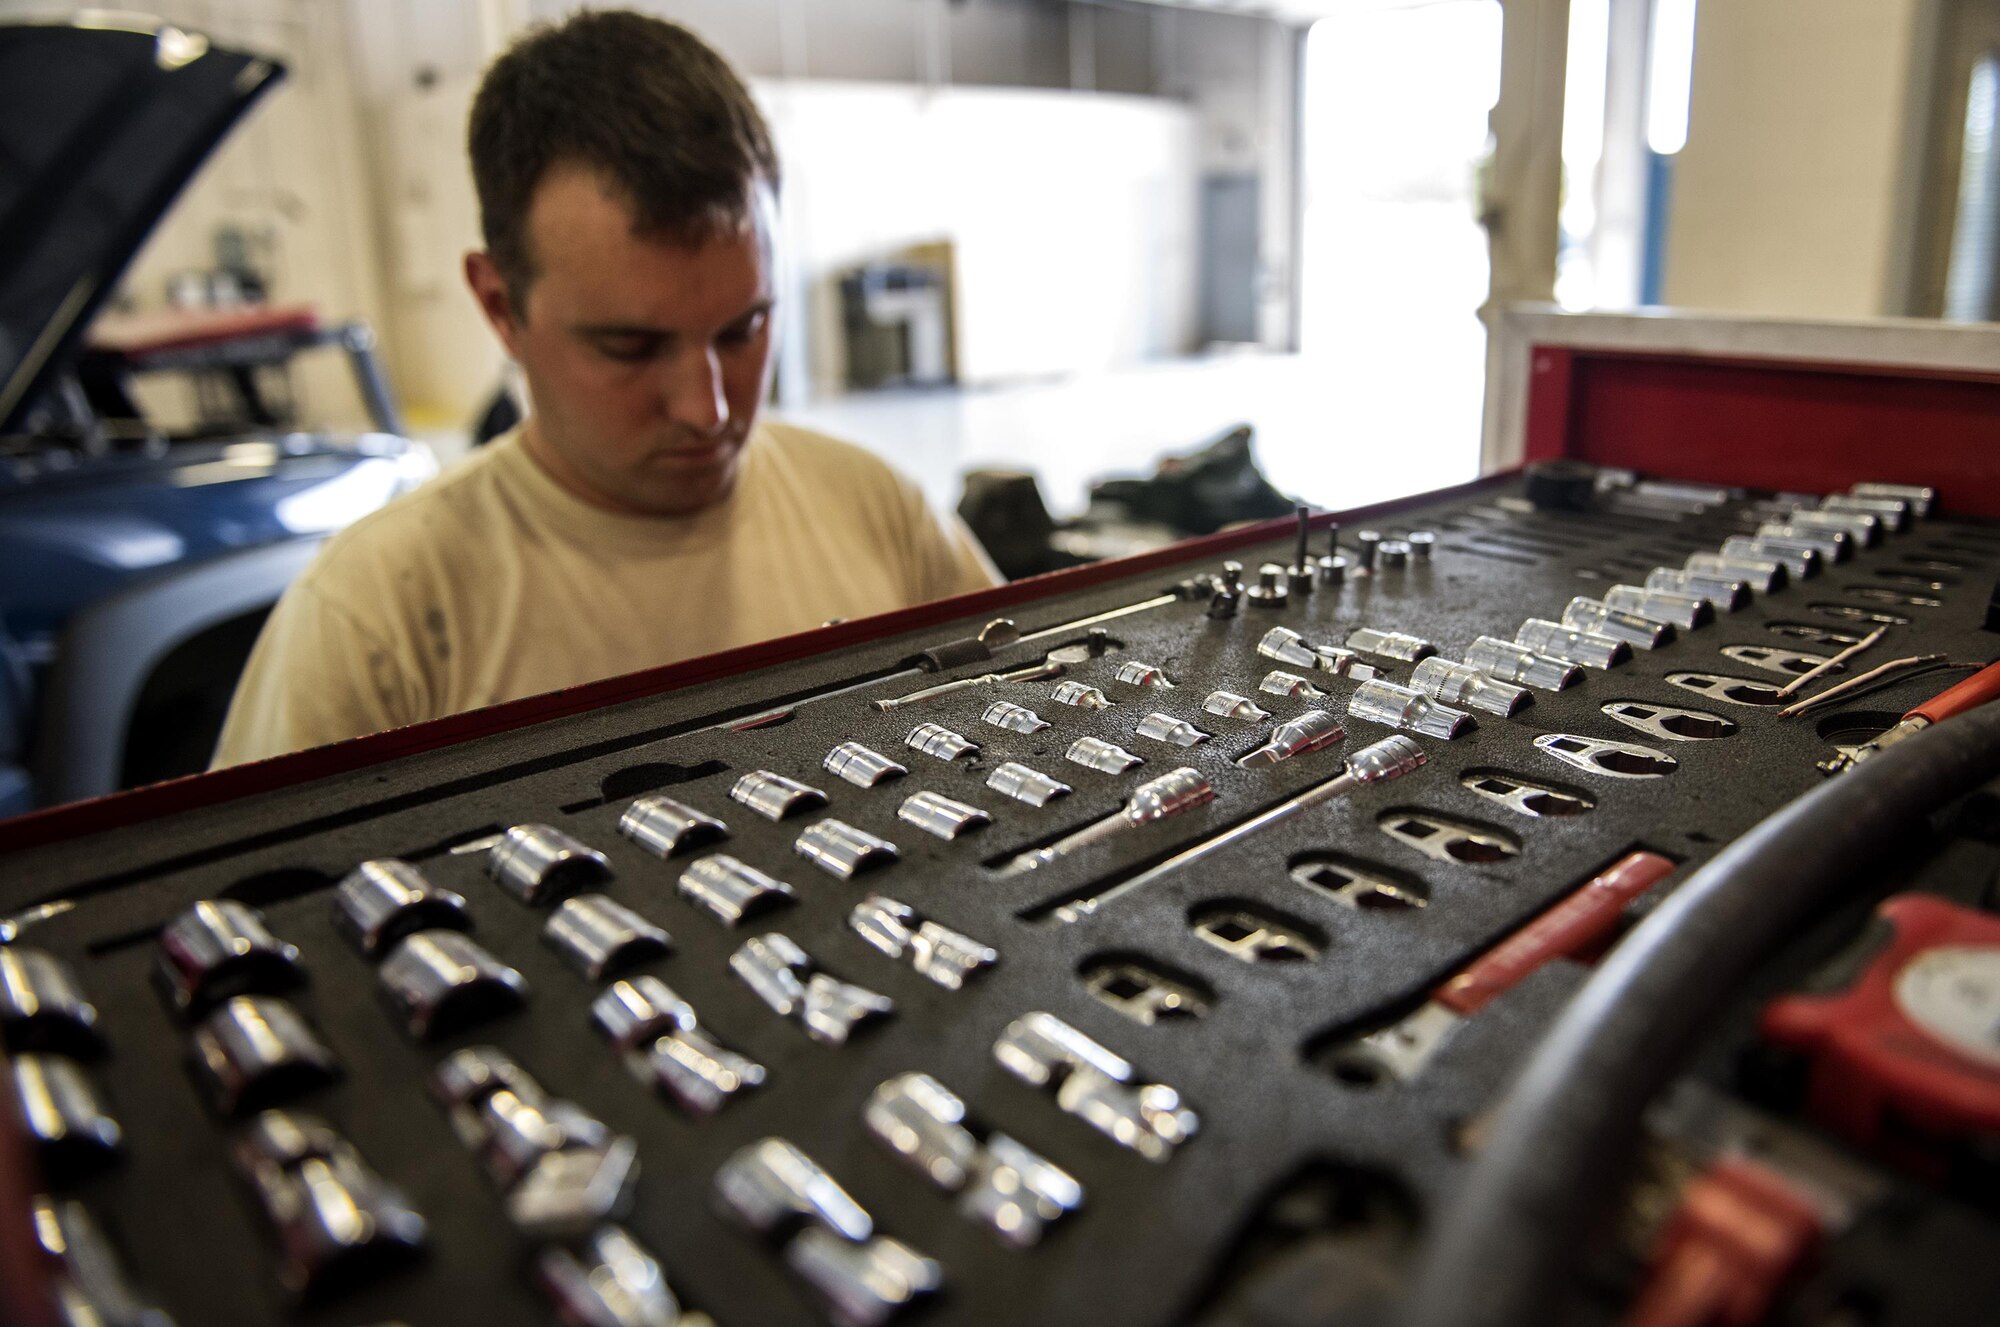 Staff Sgt. Adam Hix, 23d Logistics Readiness Squadron vehicle maintenance technician, puts away tools, Oct. 12, 2016, at Moody Air Force Base, Ga. At the end of the day, technicians ensure they put all tools back in their designated drawer to maintain accountability. (U.S. Air Force photo by Airman 1st Class Janiqua P. Robinson)